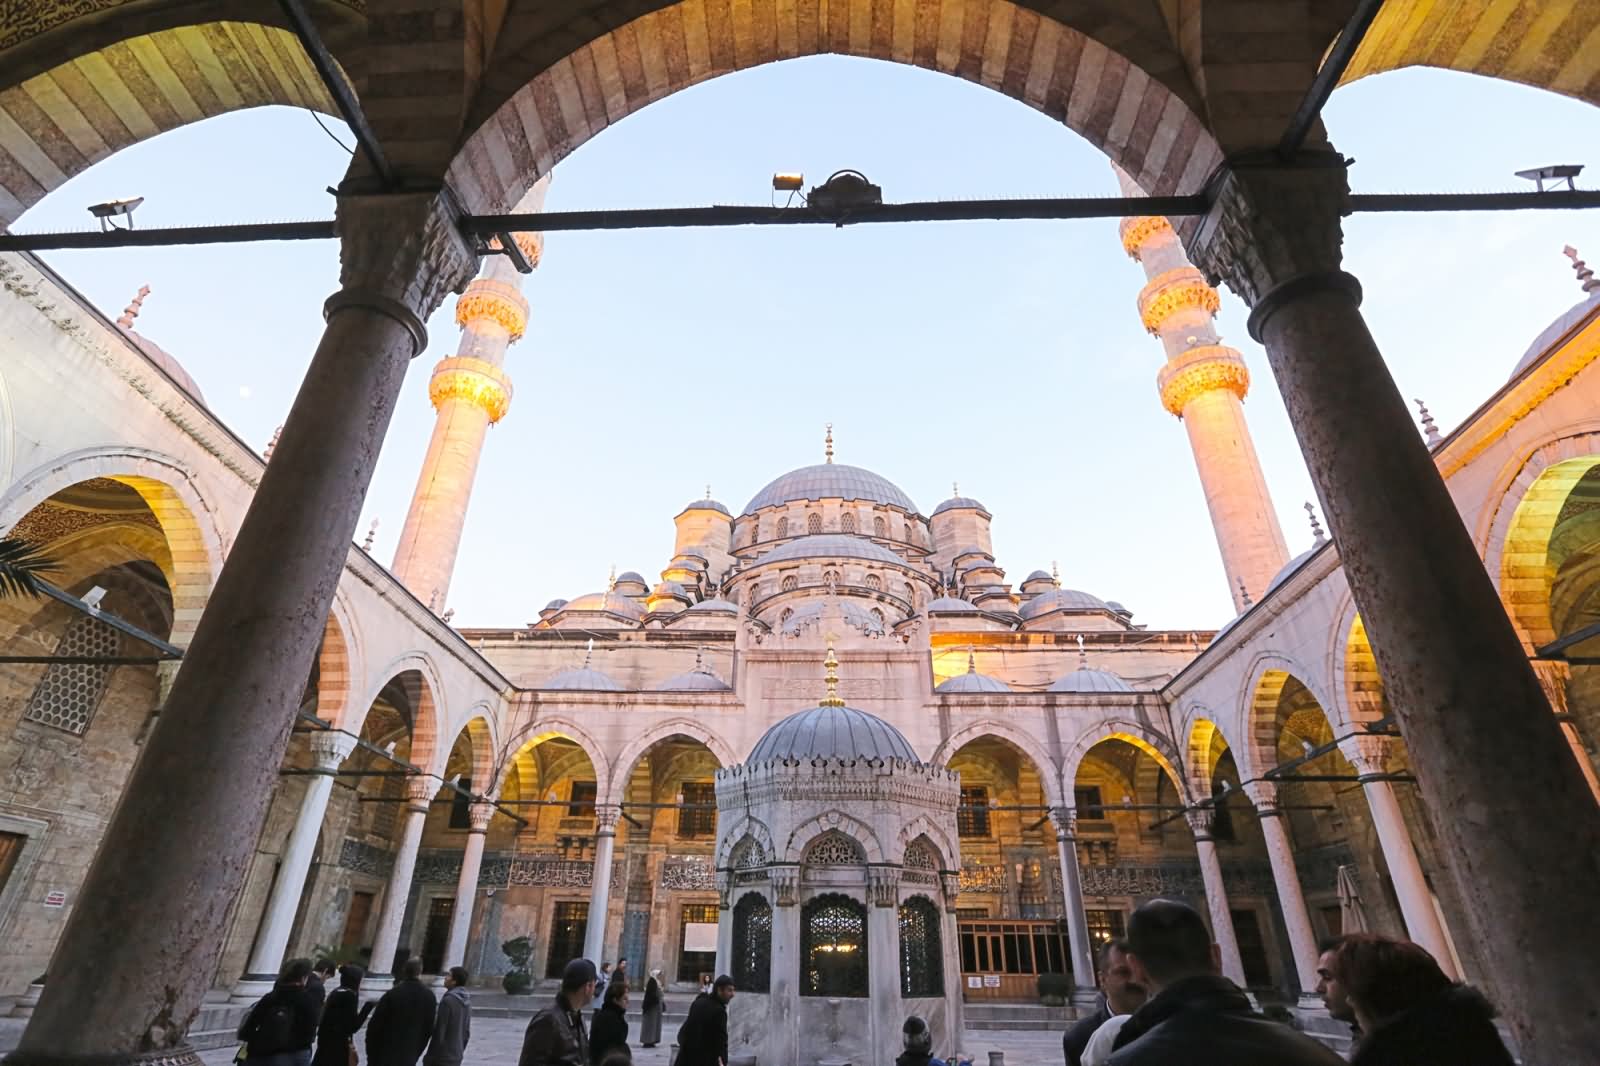 Courtyard Of The Yeni Cami In Eminonu District Of Istanbul